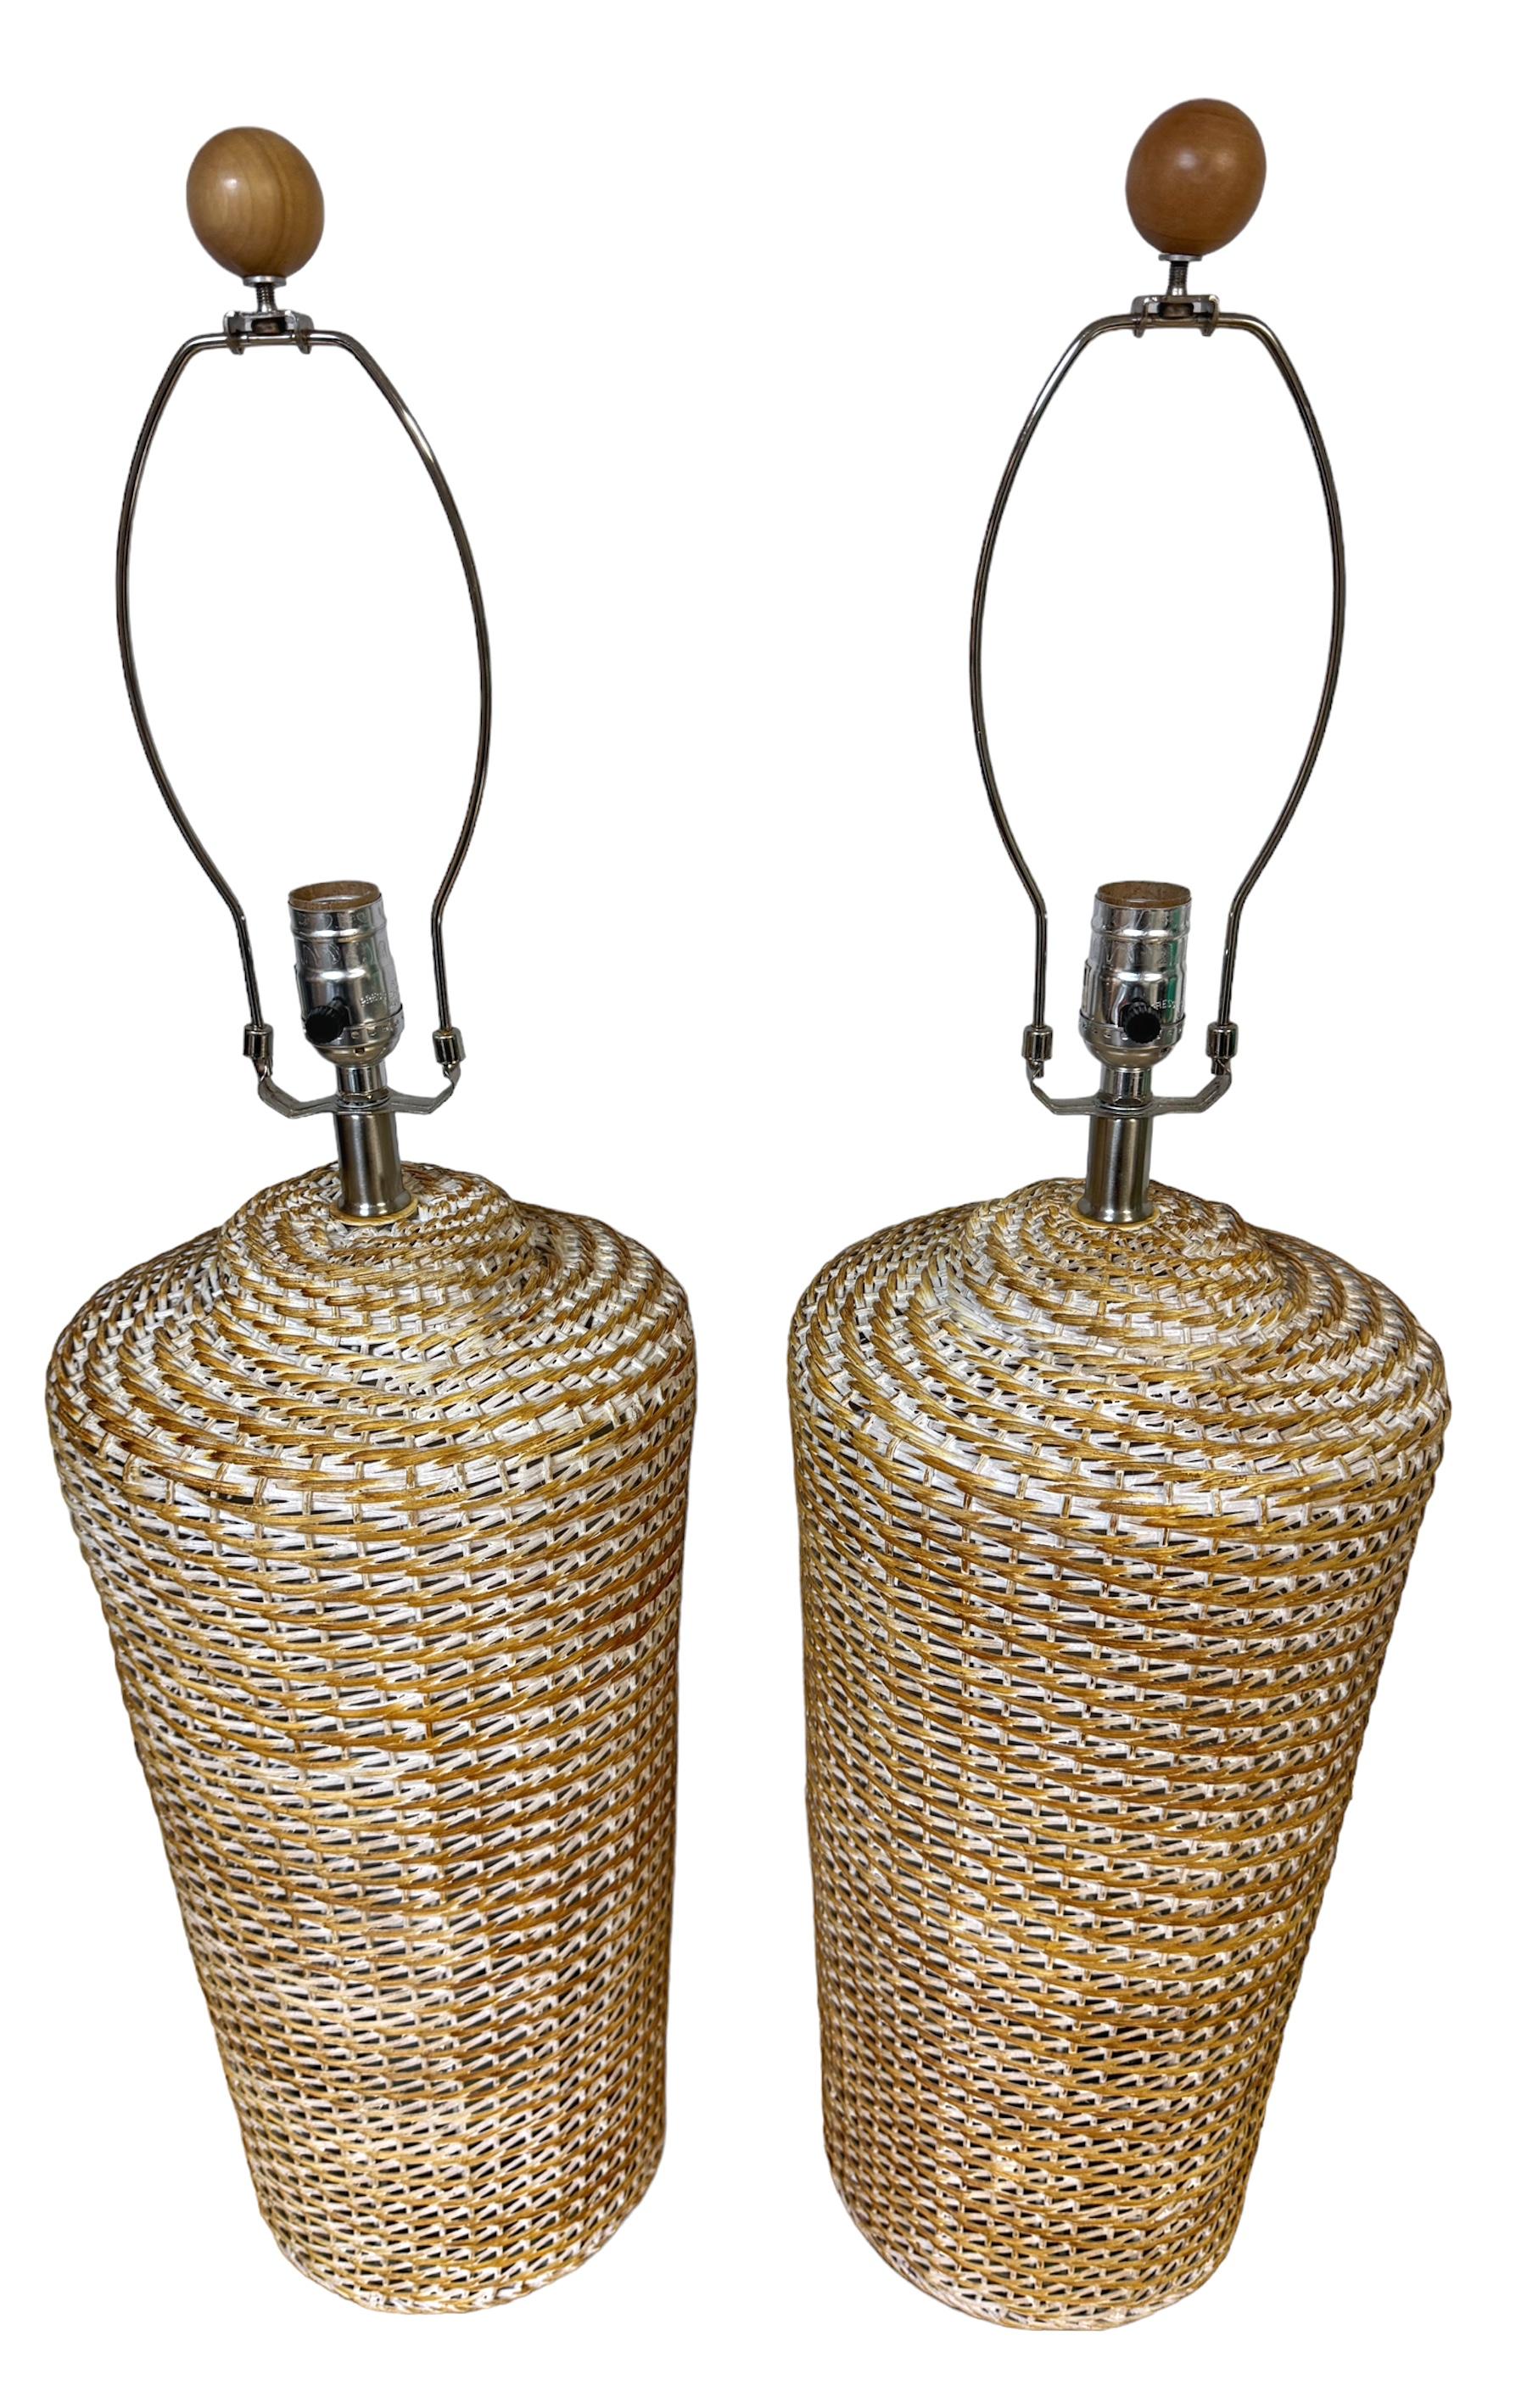 Pair of Coastal Modern White-Polychromed Woven Rattan Lamps 
USA, circa 1980s

A striking pair of coastal modern white-polychromed woven rattan lamps originating from the USA circa the 1980s. These organic lamps are of large scale and feature subtle